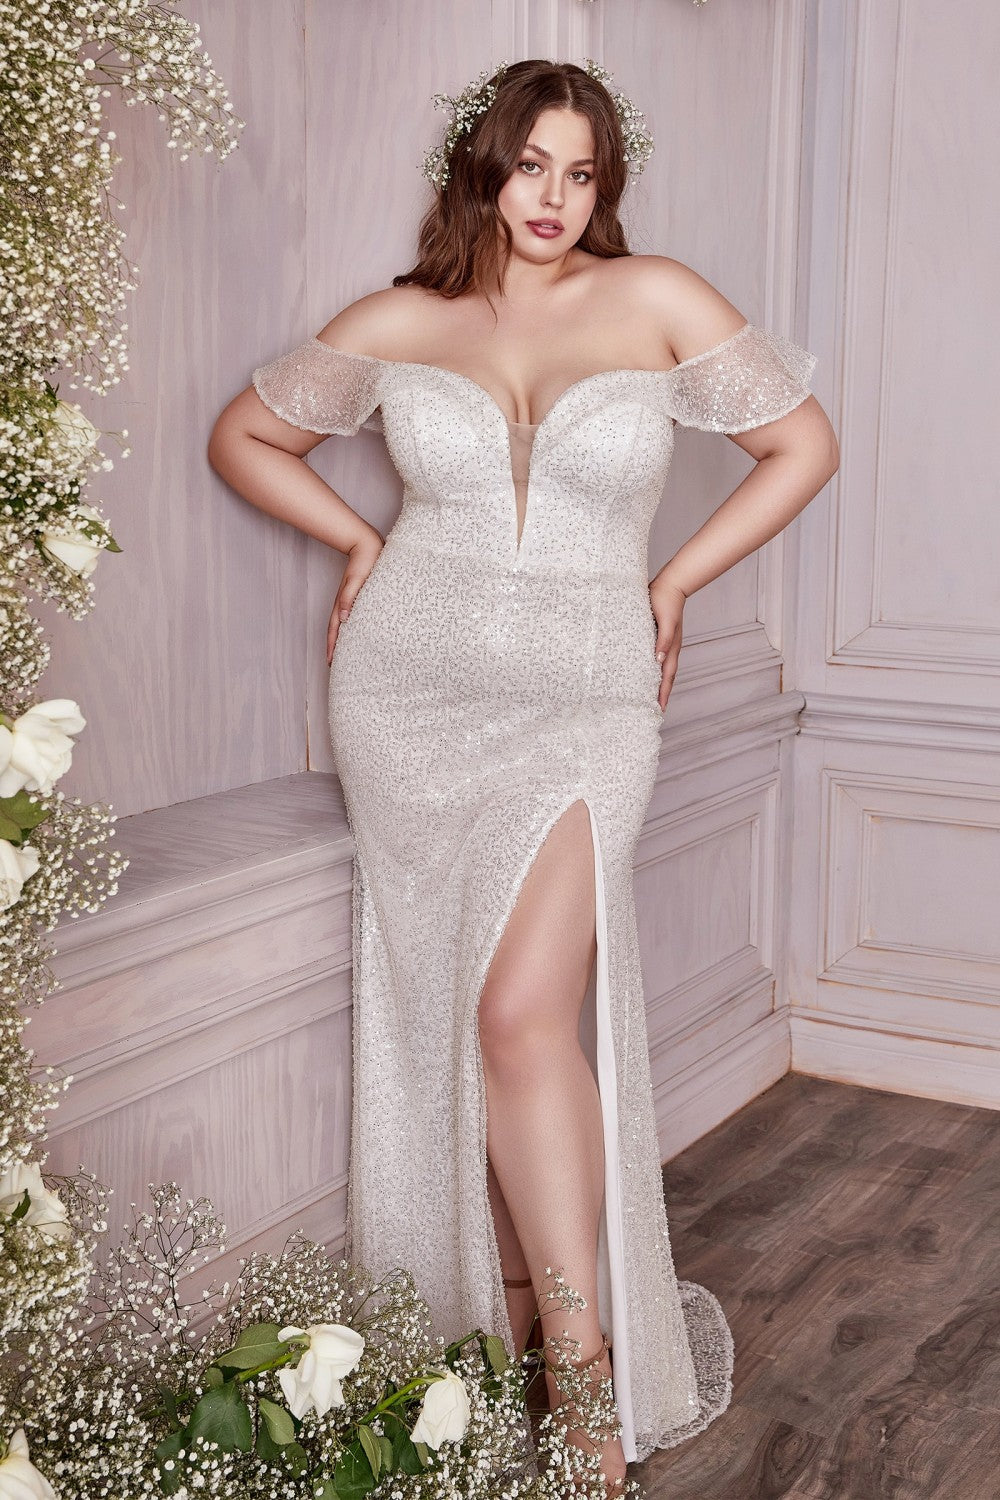 Off Shoulder Sequin Wedding & Bride Gown Fitted Bodice with Deep Illusion Neckline Sensual Bride Gown Playful High Leg Slit CDCH167W Elsy Style Wedding Dresses